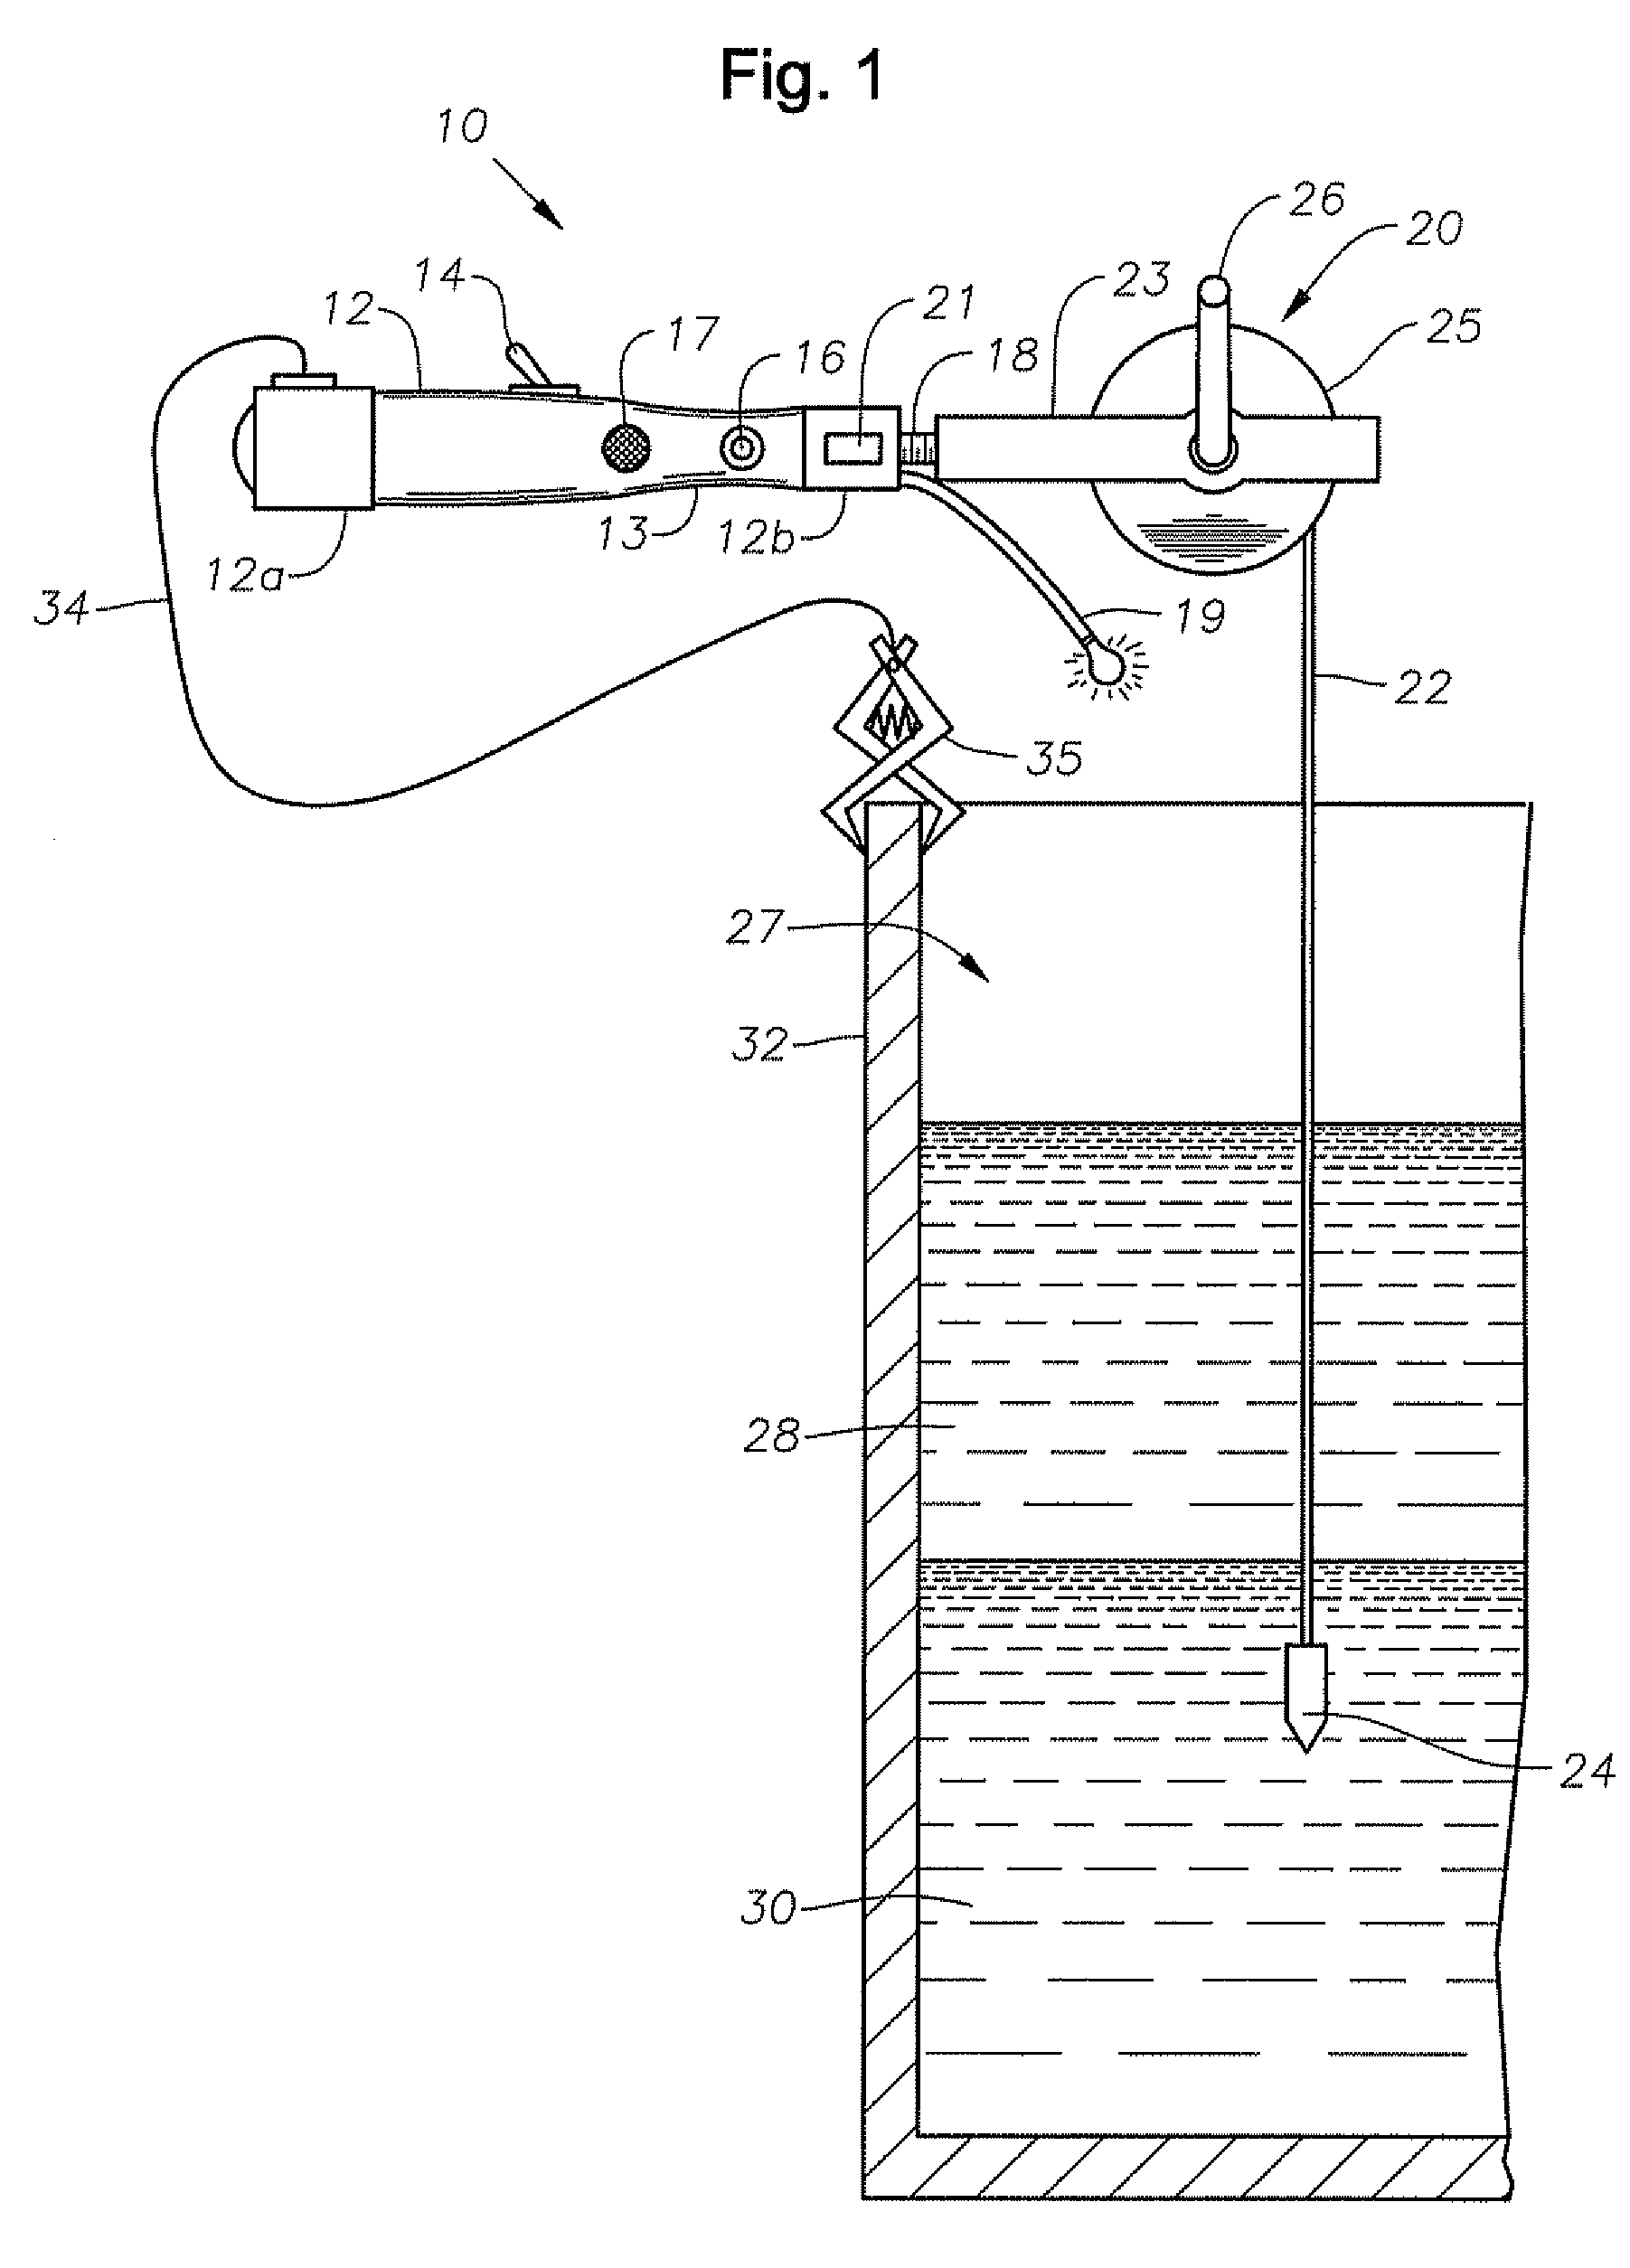 Apparatus for detecting water level mixtures in fluids